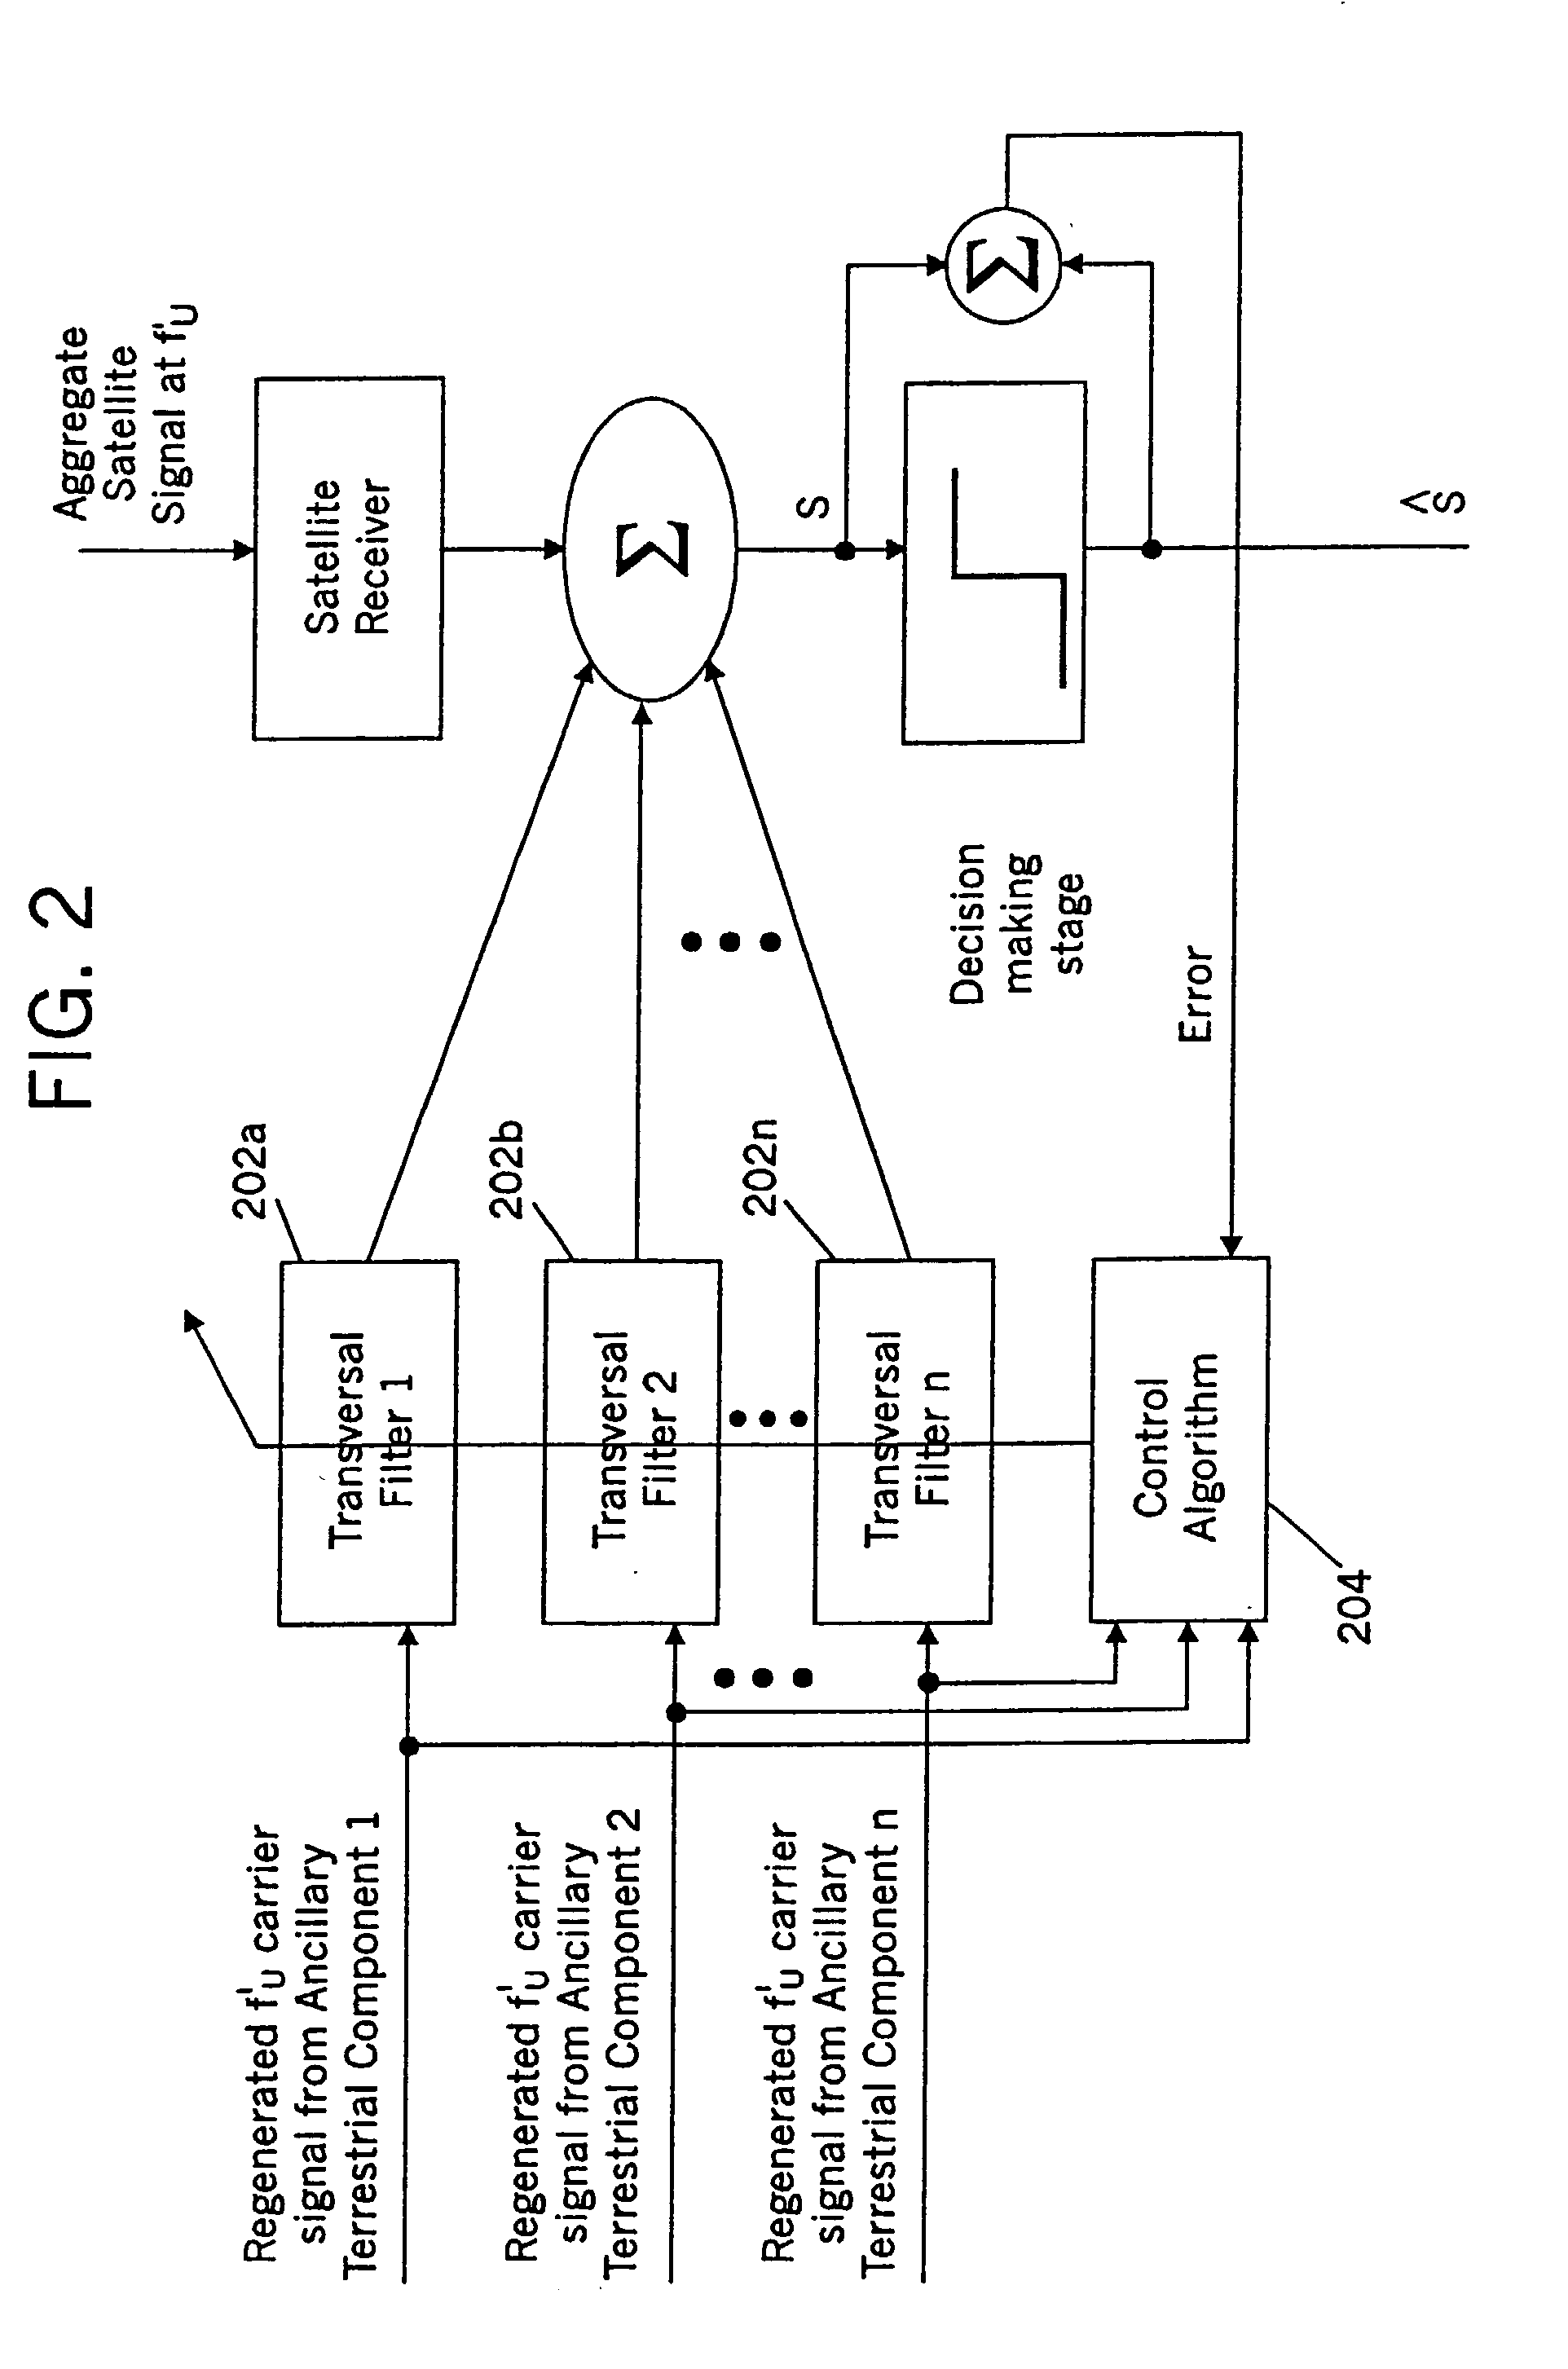 Space-based network architectures for satellite radiotelephone systems